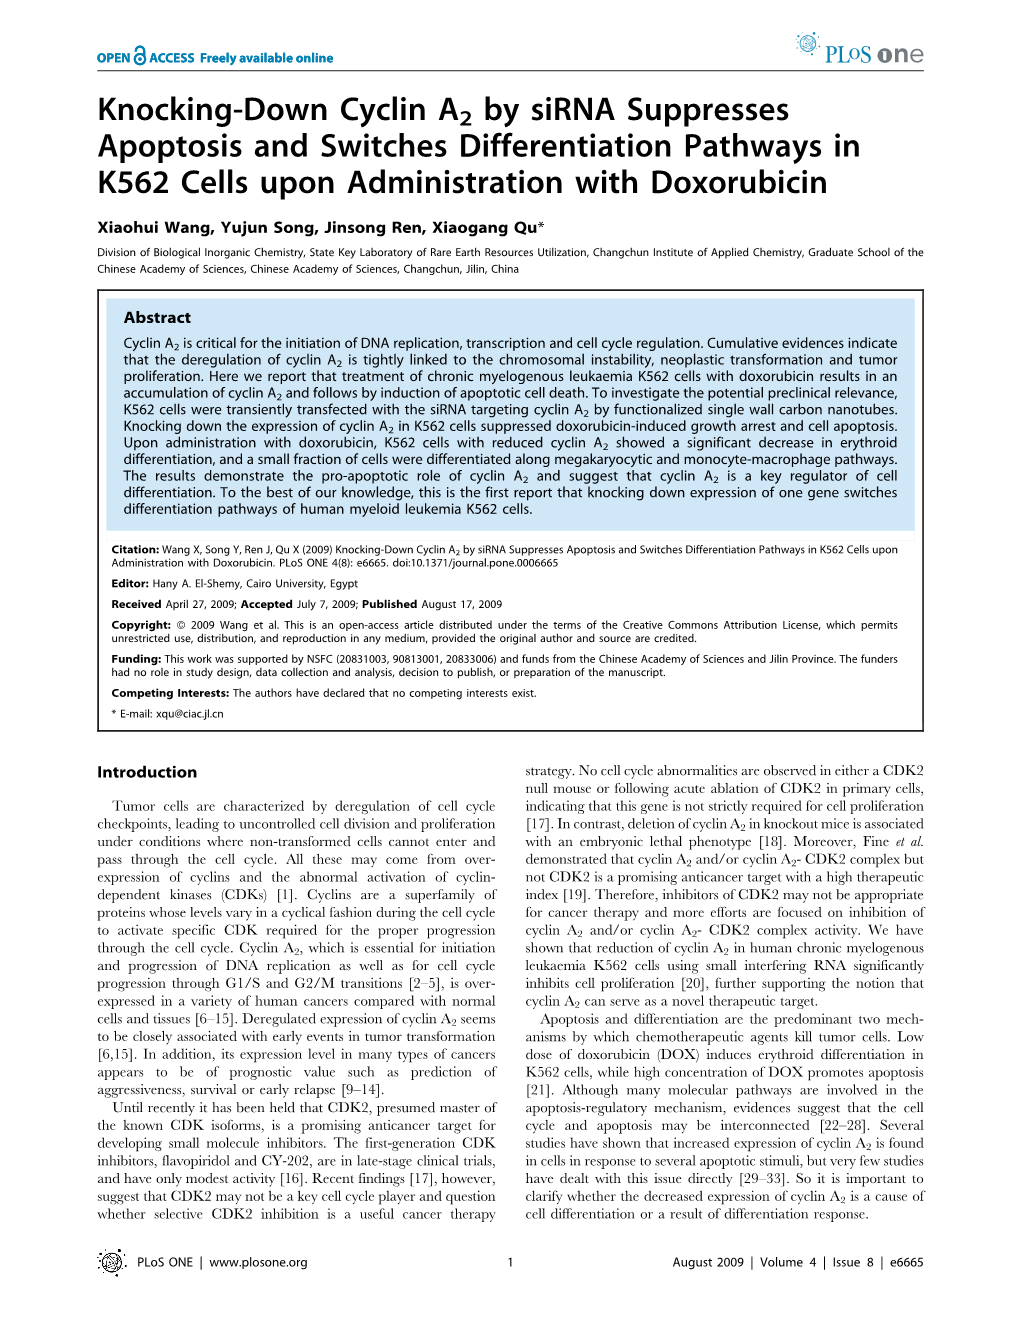 Knocking-Down Cyclin A2 by Sirna Suppresses Apoptosis and Switches Differentiation Pathways in K562 Cells Upon Administration with Doxorubicin